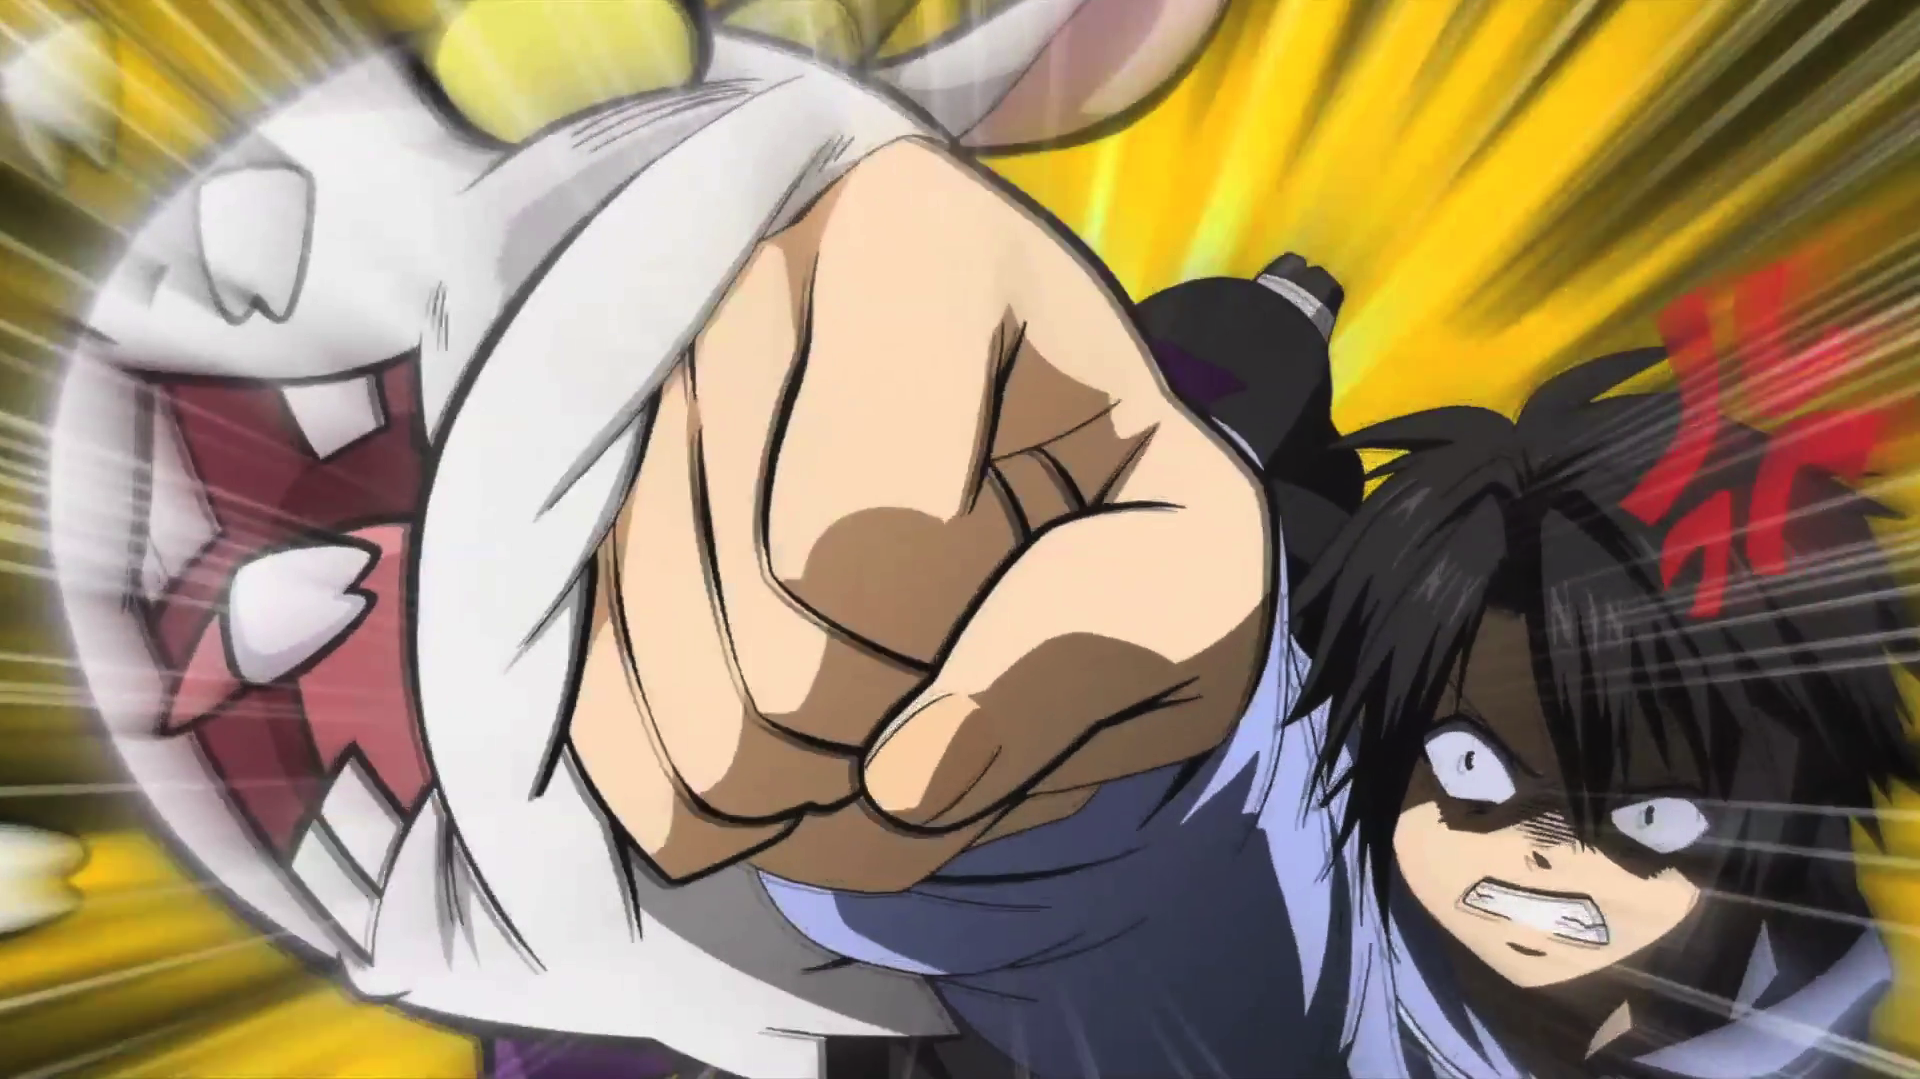 Anime Attack Fire Fist Front Effect | FootageCrate - Free FX Archives